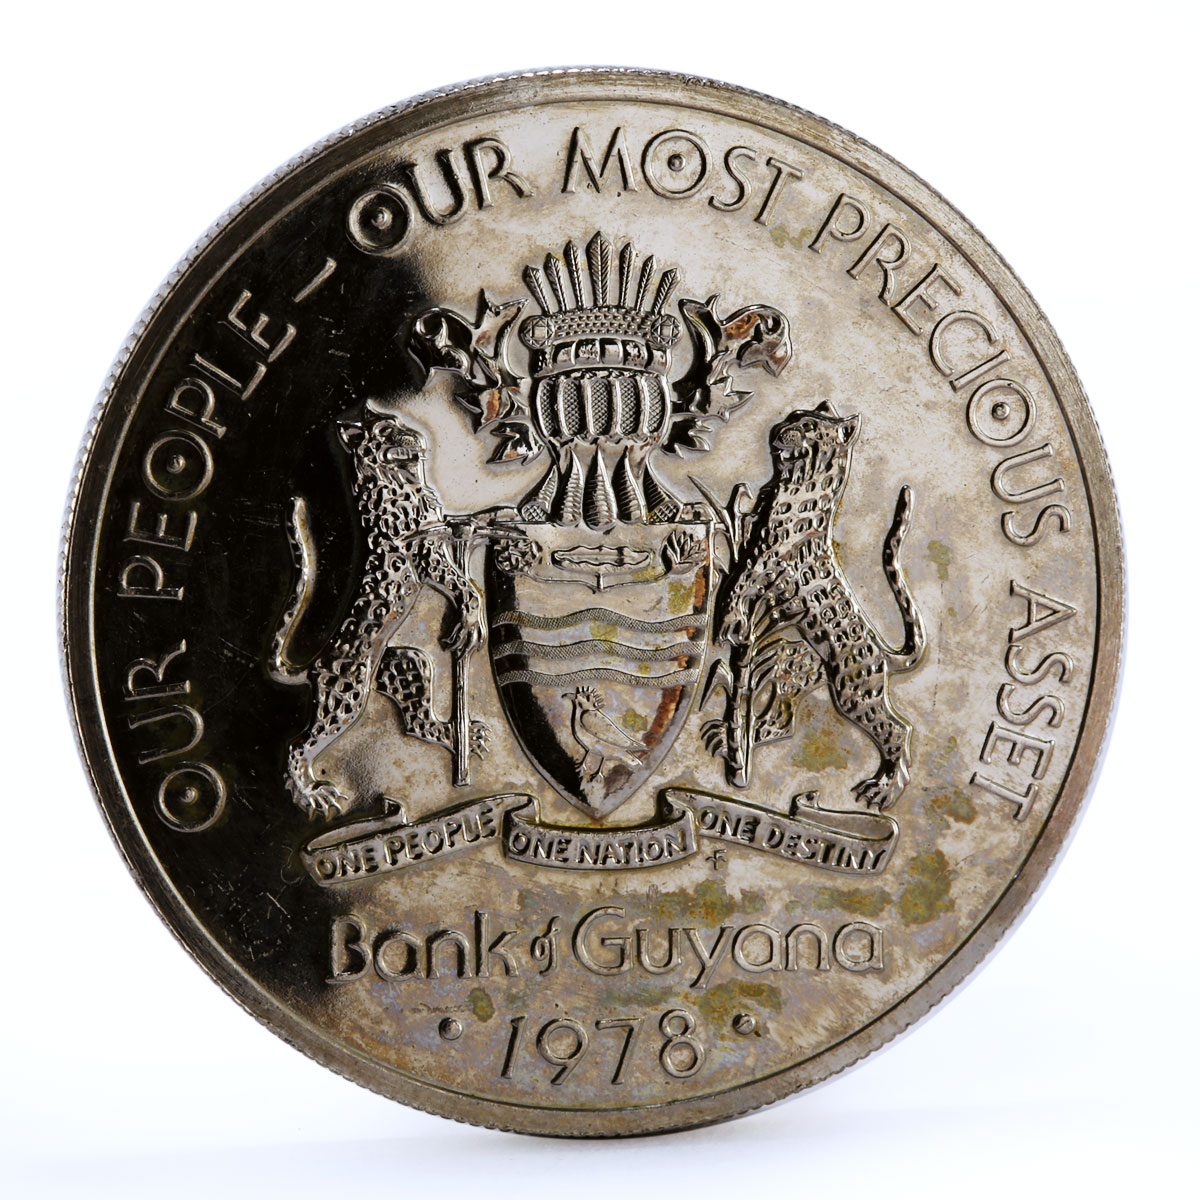 Guyana 10 dollars 10th Anniversary of Independence Guffy CuNi coin 1978